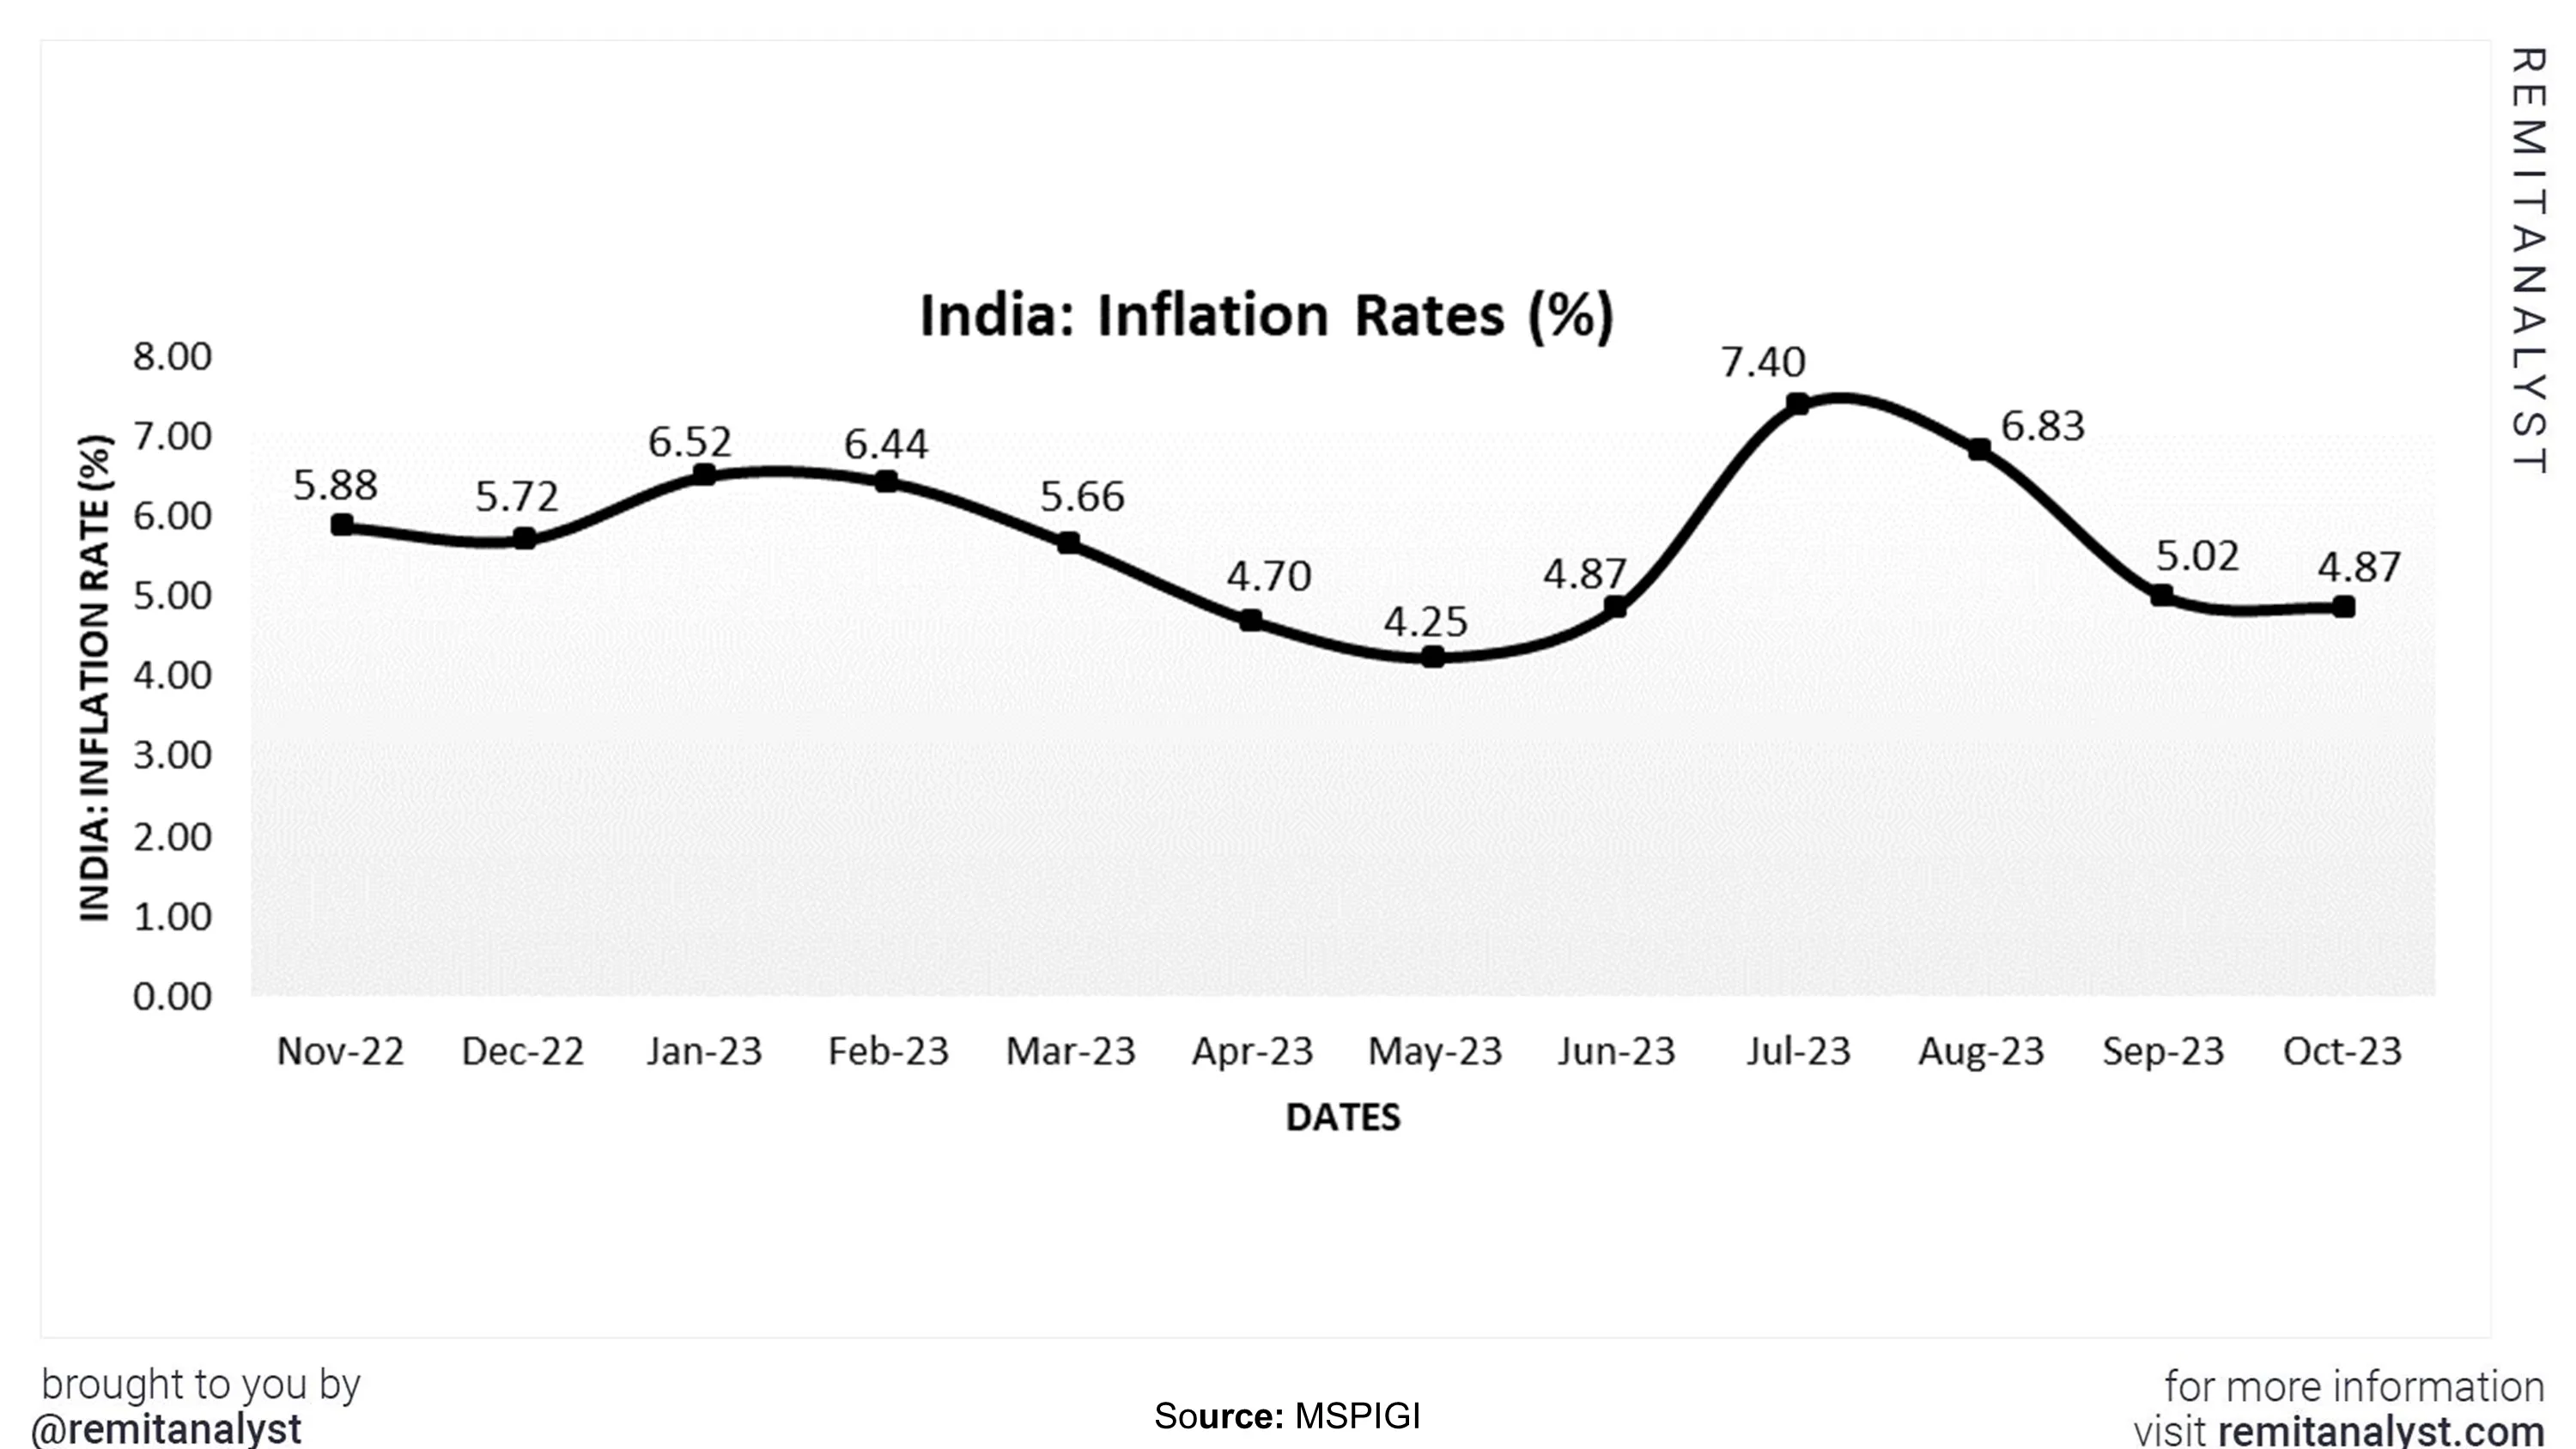 inflation-rates-in-india-from-nov-2022-to-oct-2023